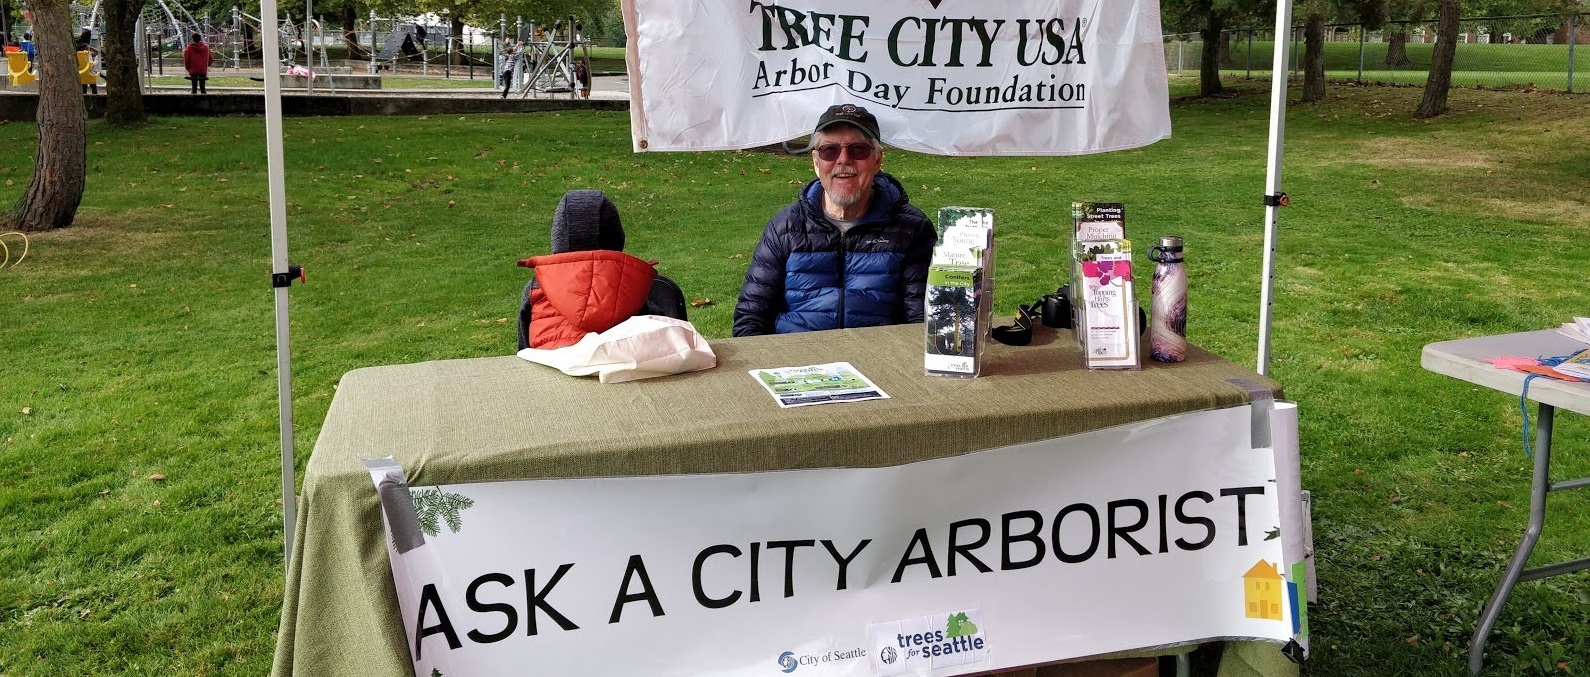 Ask an arborist booth